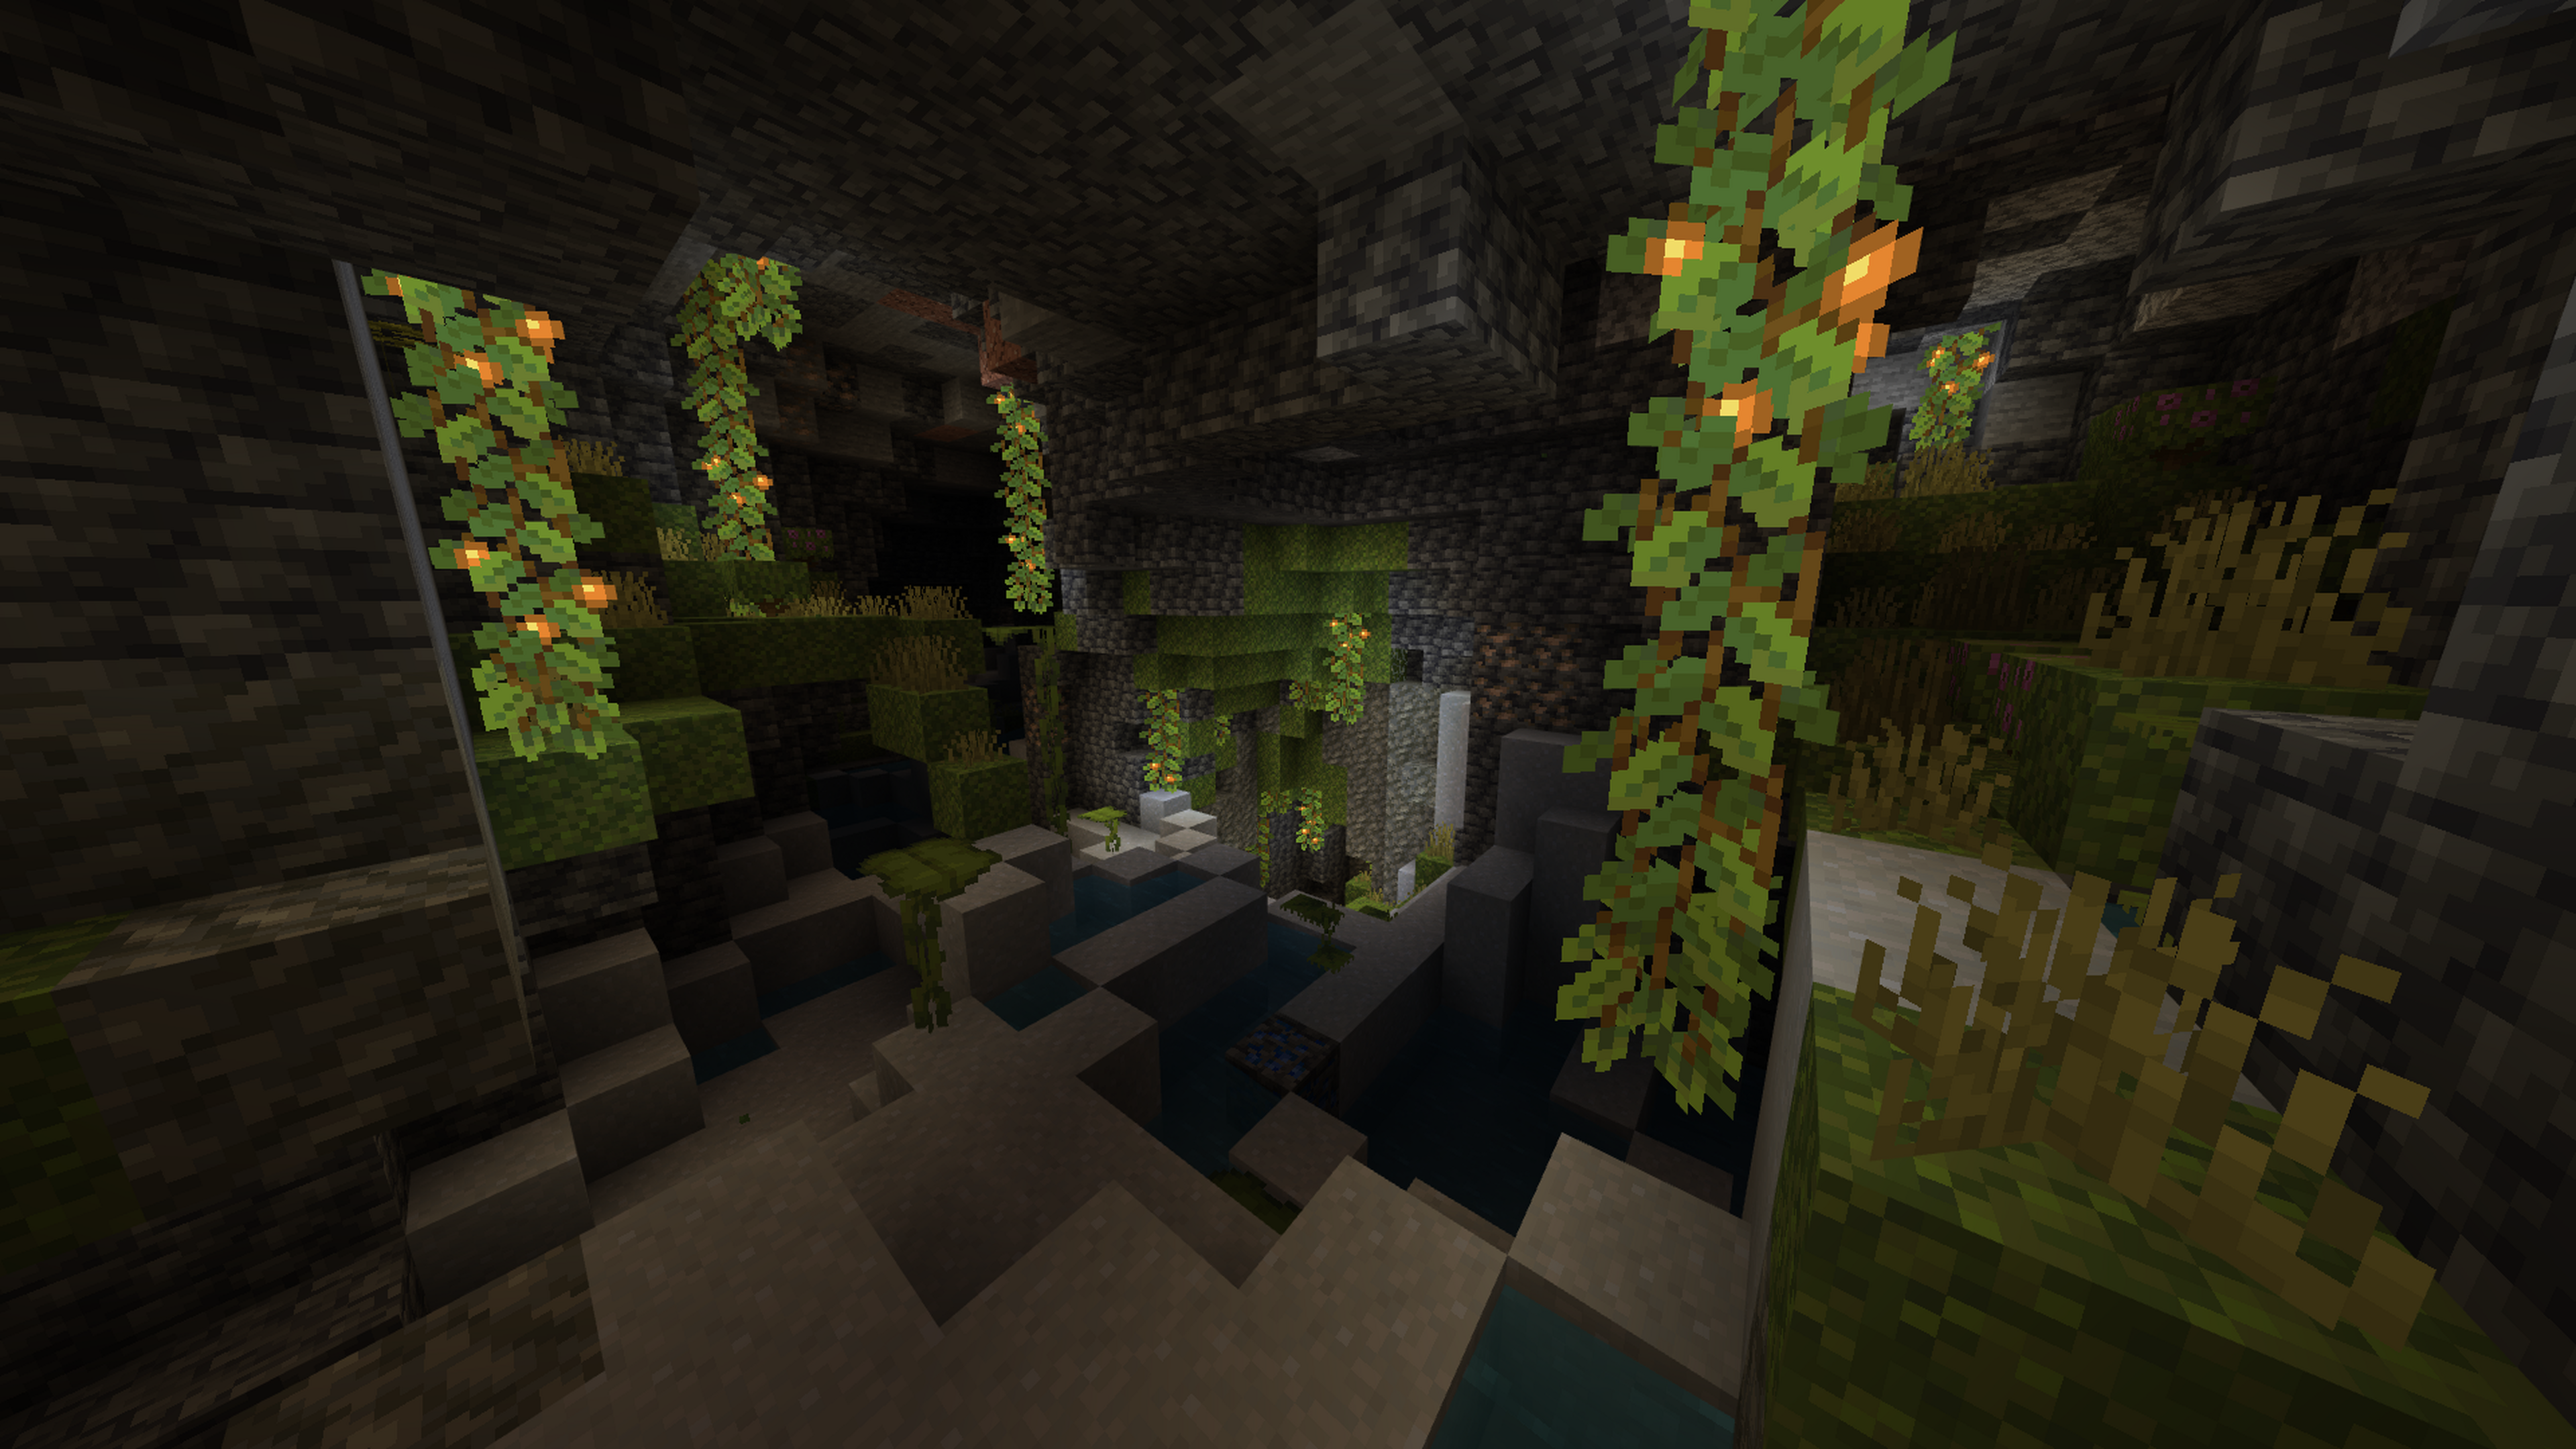 Minecraft’s lush cave biome with lots of clay on the floor